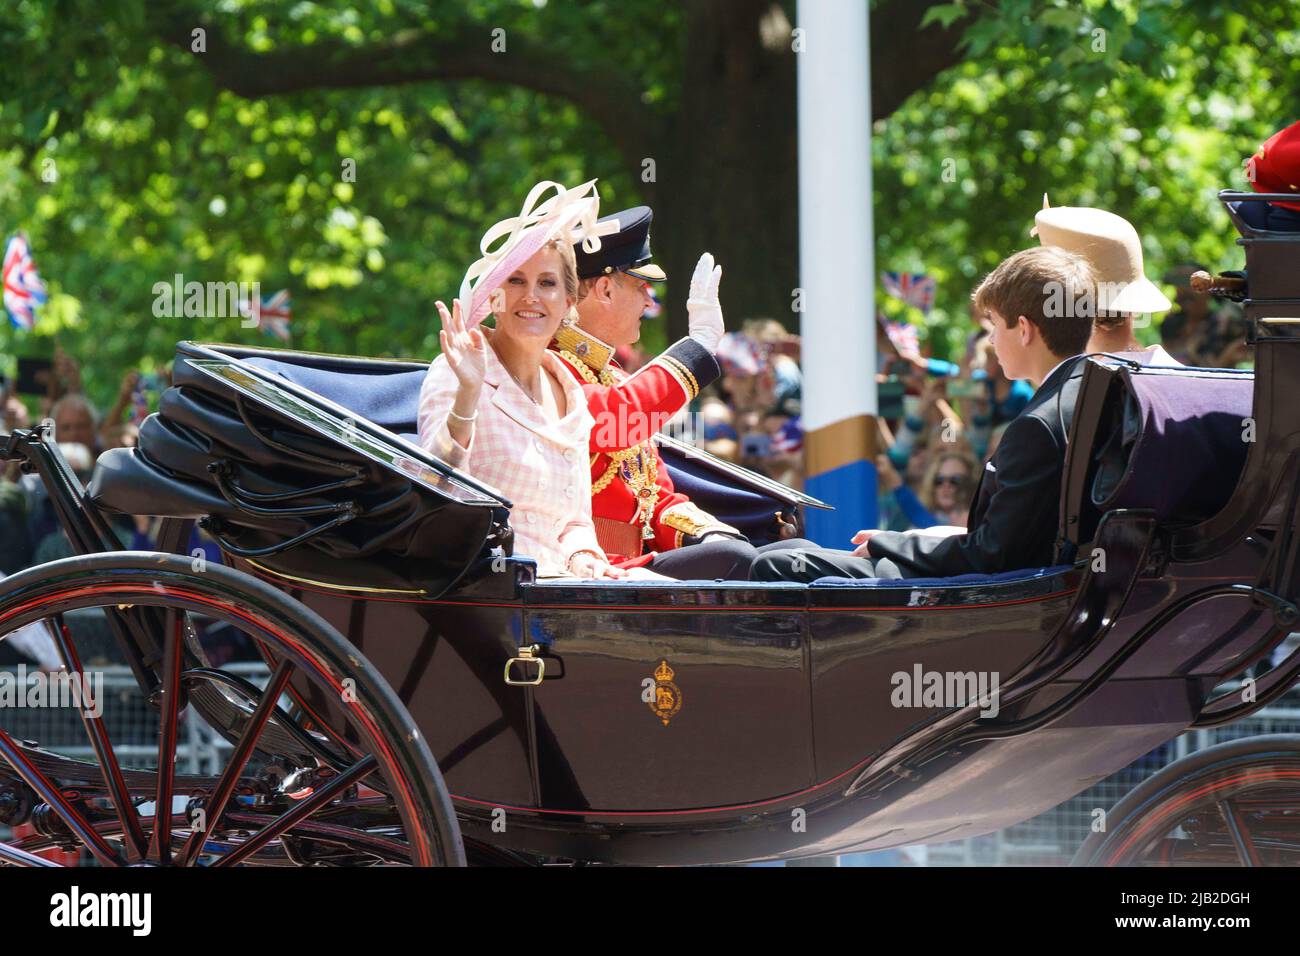 LONDON - JUNE 2: Sophie, Countess of Wessex, Prince Edward, James, Viscount Severn and Lady Louise Windsor, in a carriage on The Mall at the Trooping the Colour ceremony on June 2, 2022 in central London. Photo by David Levenson Credit: David Levenson/Alamy Live News Stock Photo